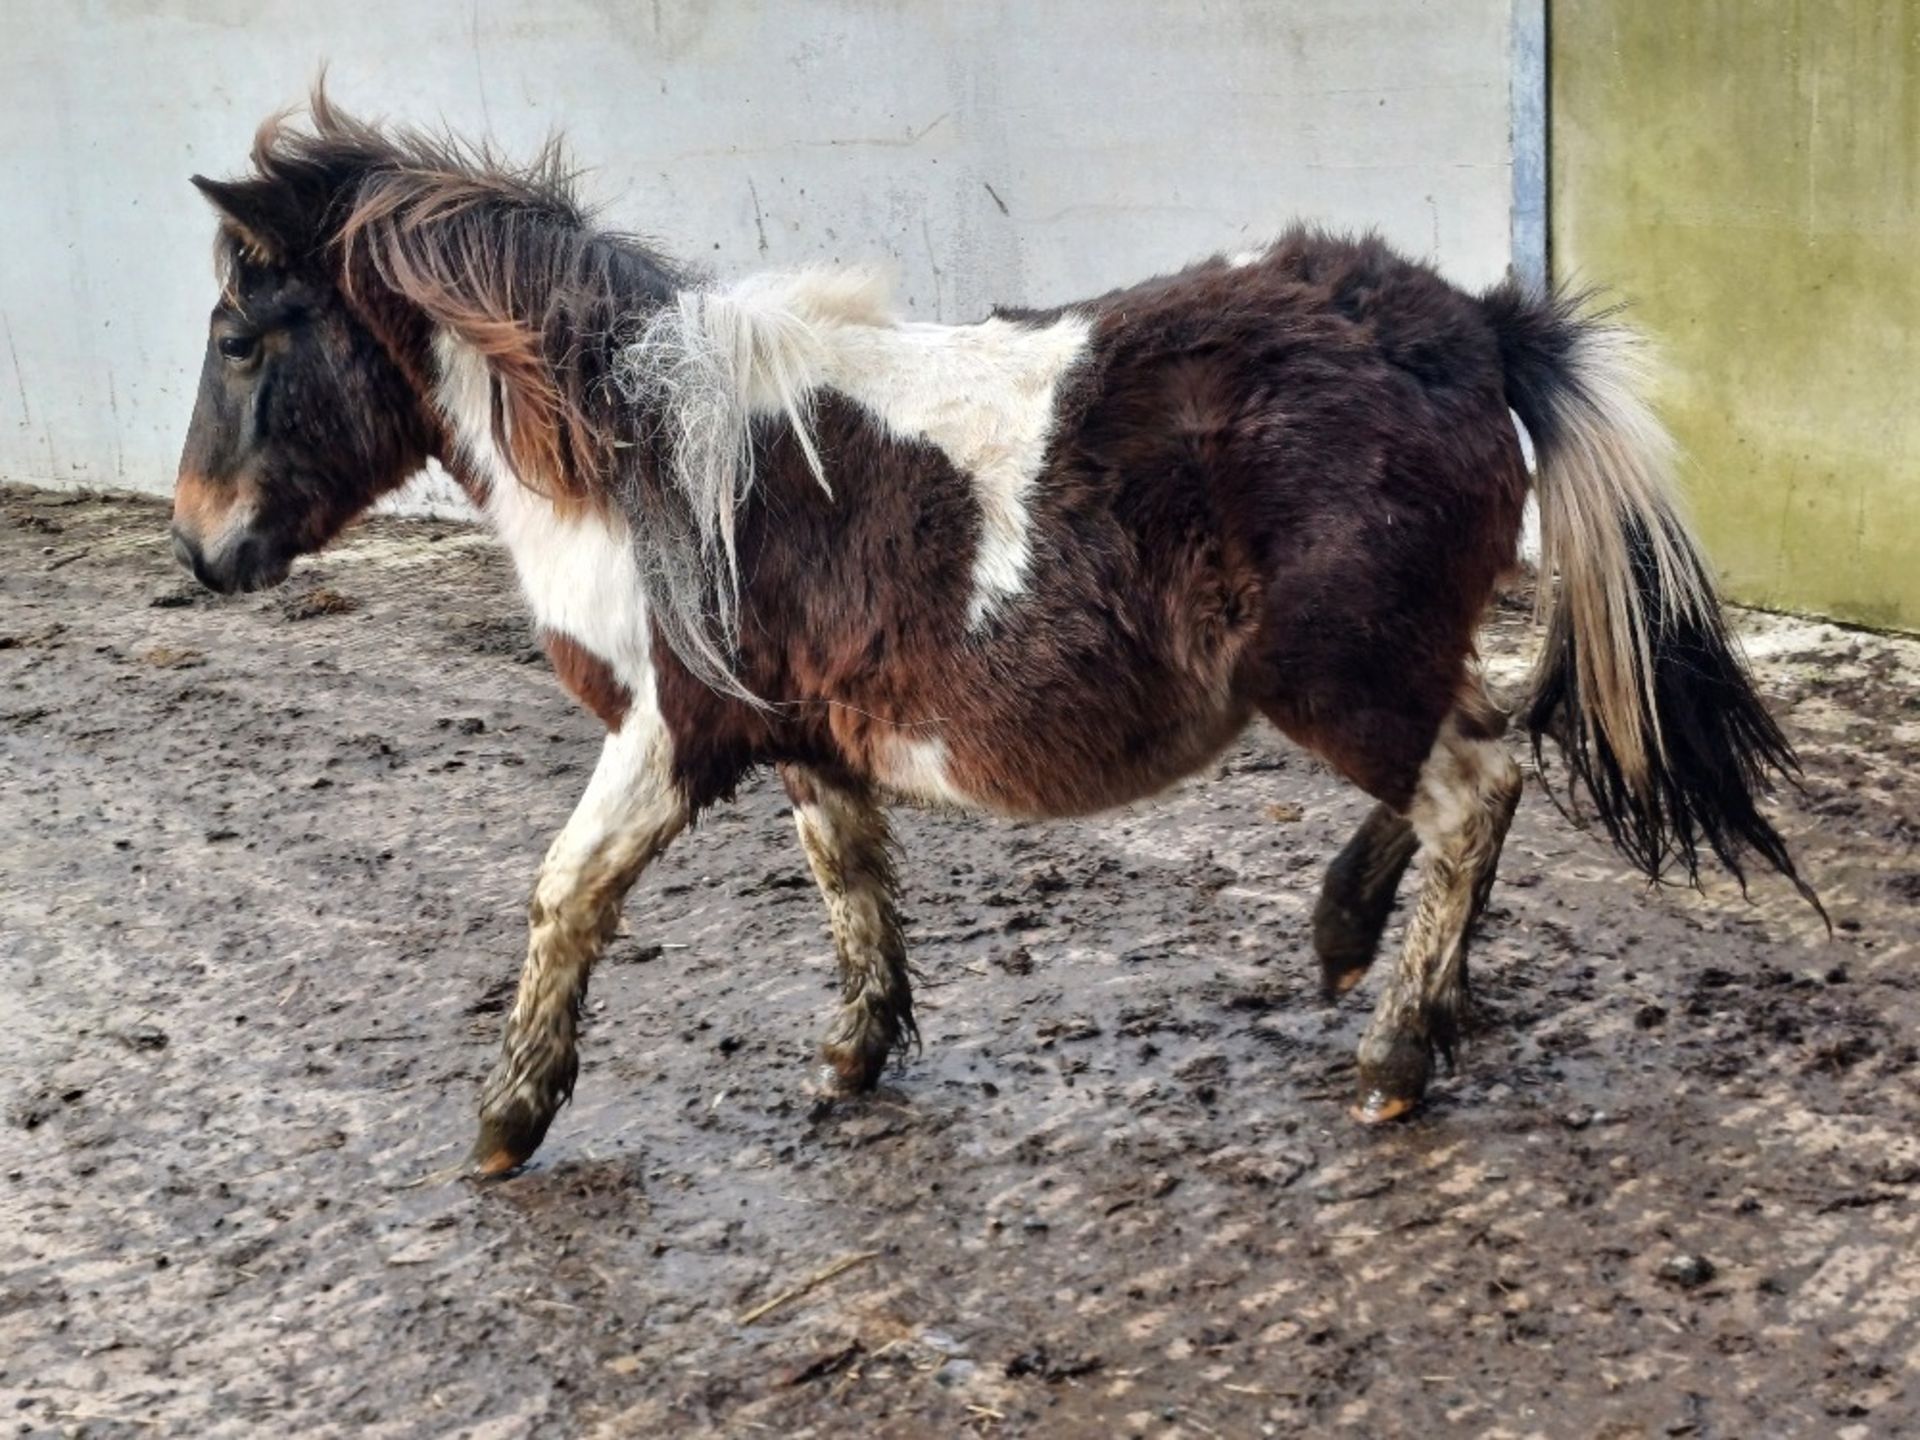 'GODSWORTHY SPICE' DARTMOOR HILL PONY SKEWBALD COLT APPROX 18 MONTHS OLD - Image 5 of 12